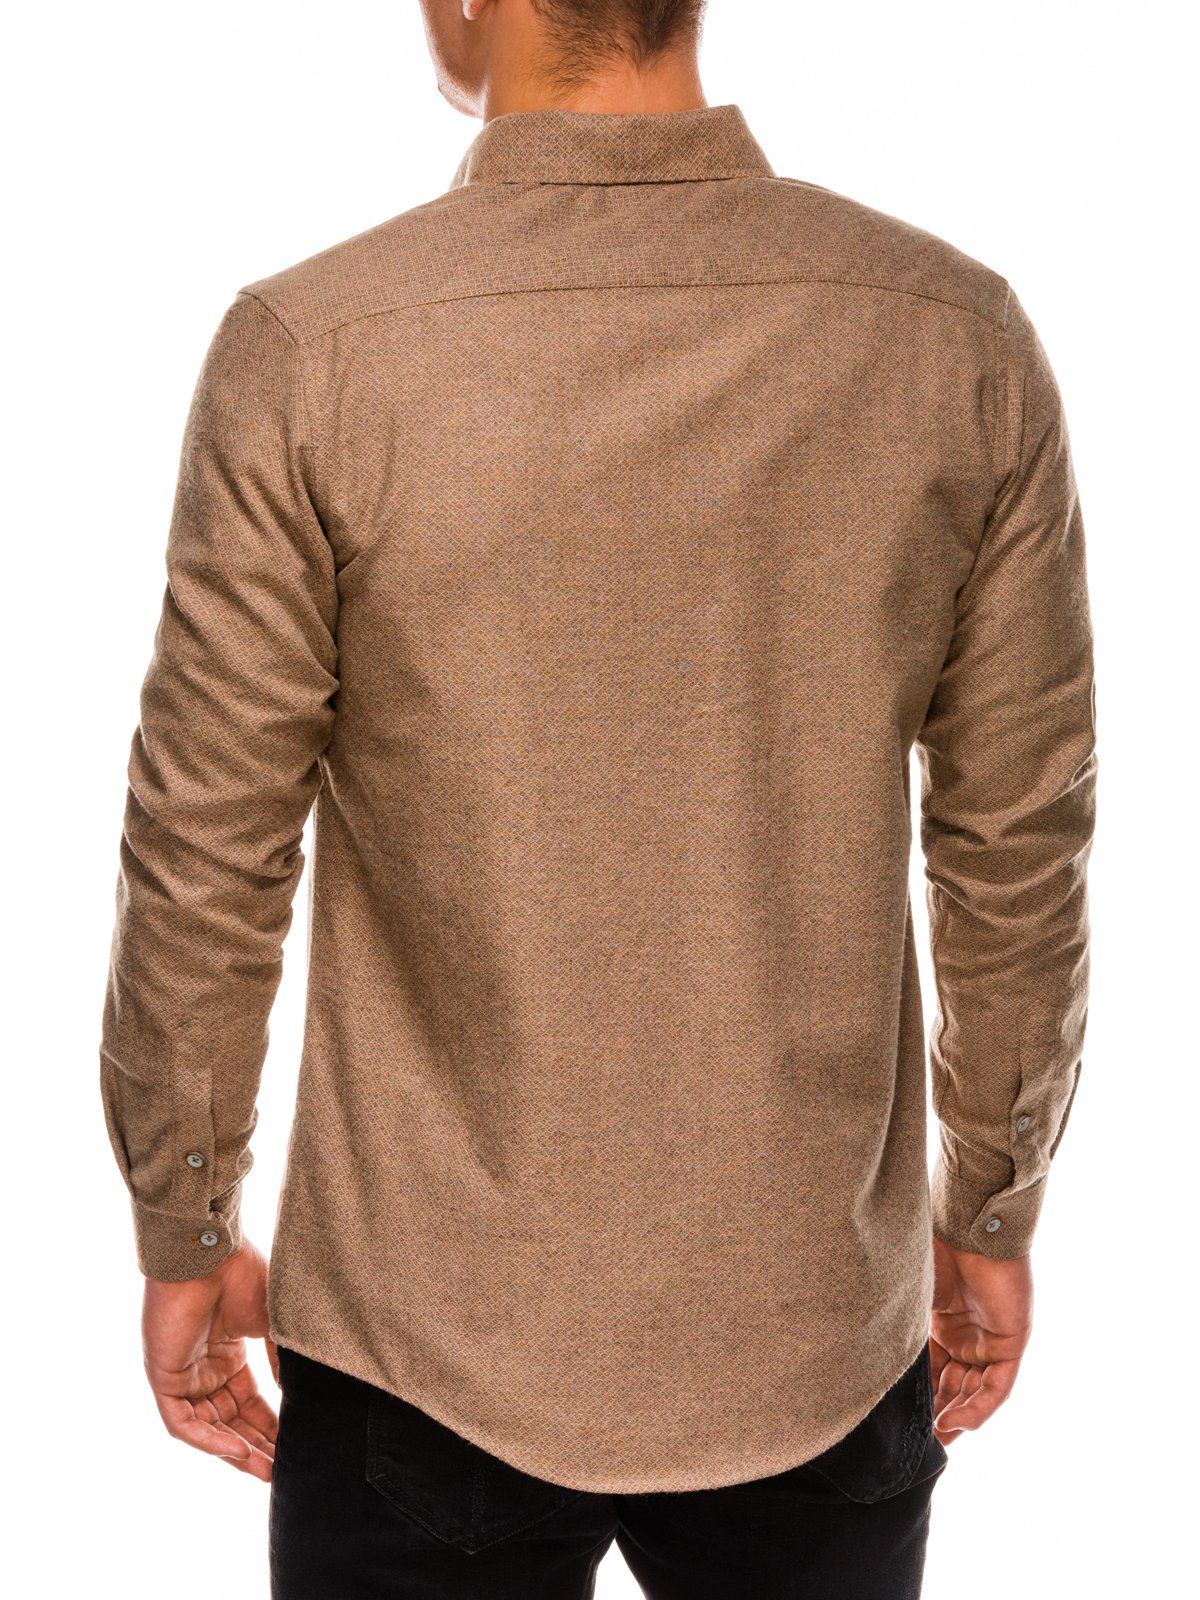 Men's shirt with long sleeves K512 - light brown | MODONE wholesale ...